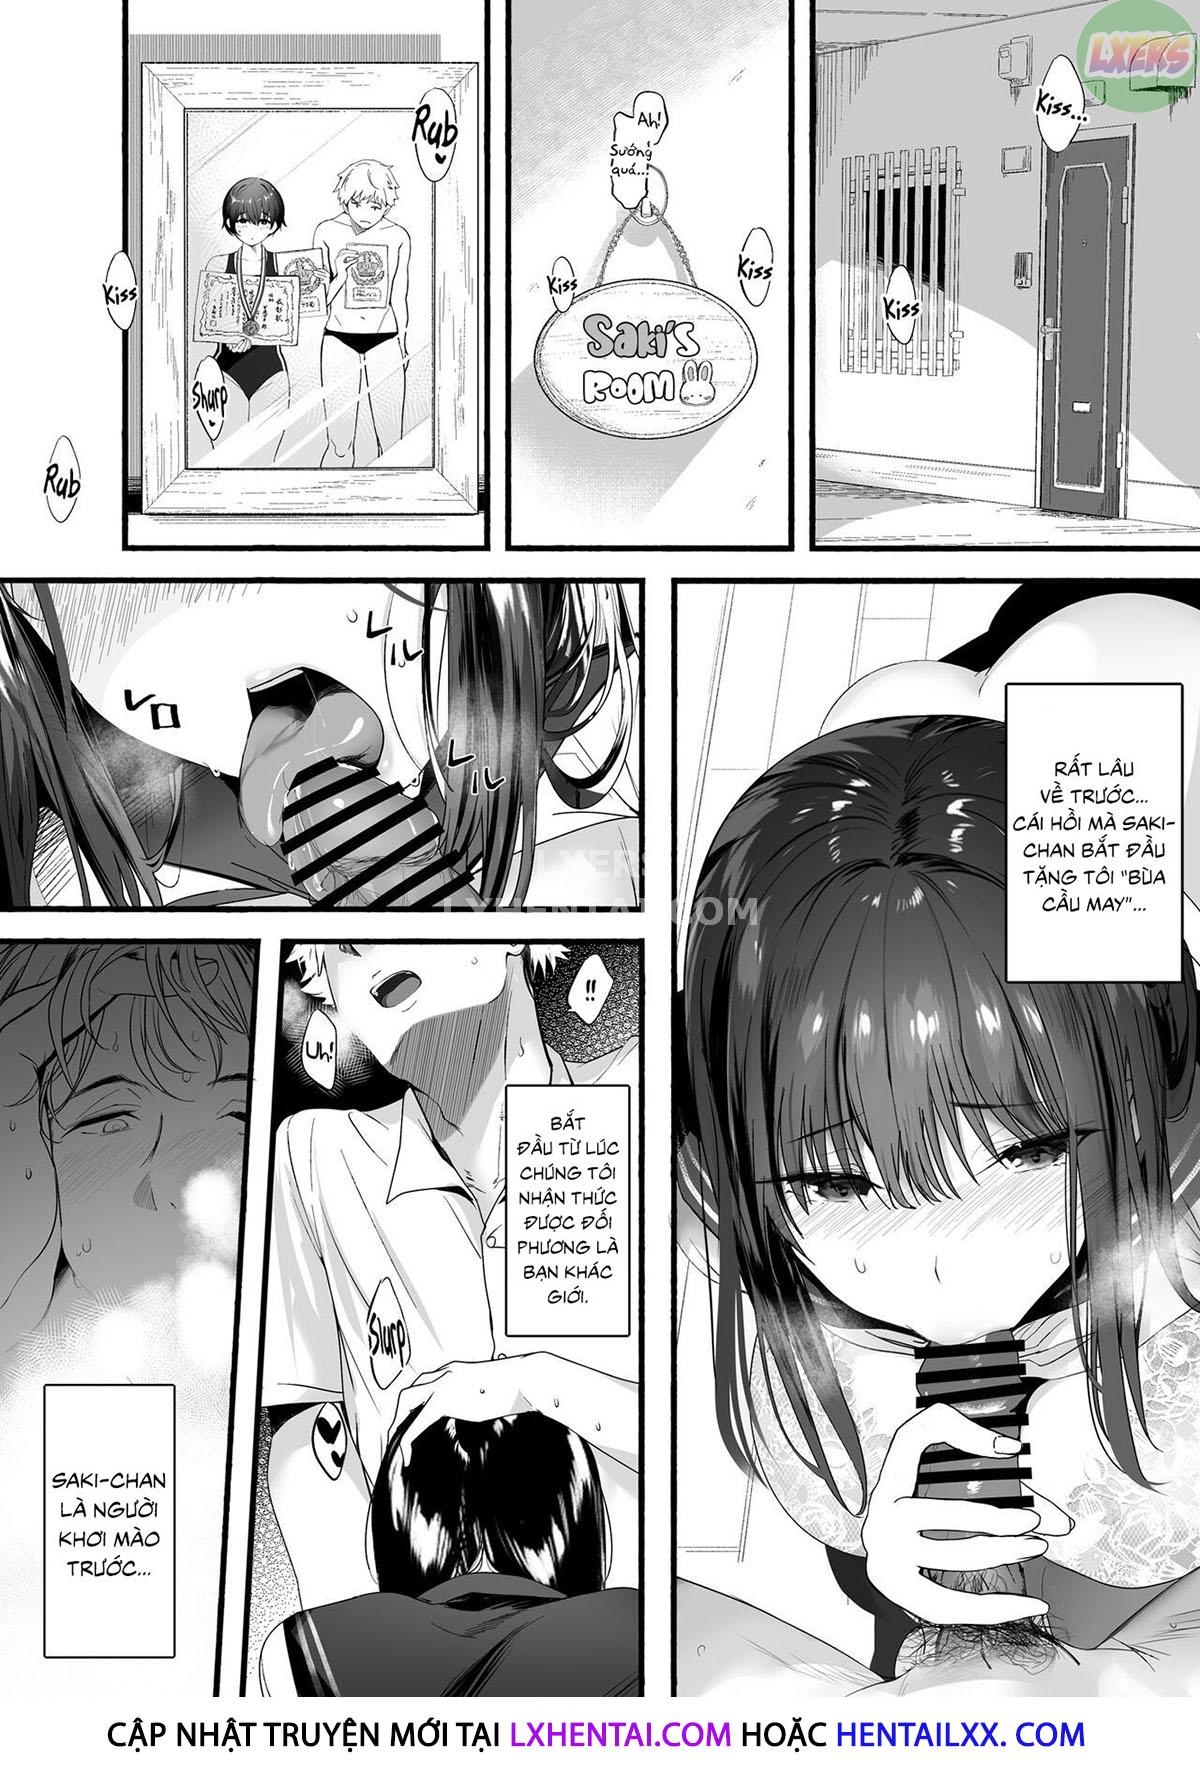 Xem ảnh 1651856992233_0 trong truyện hentai The Whole Story Of My Neat Childhood Friend In The Swimming Club Being Toyed With By A Dumbass - One Shot - truyenhentai18.pro